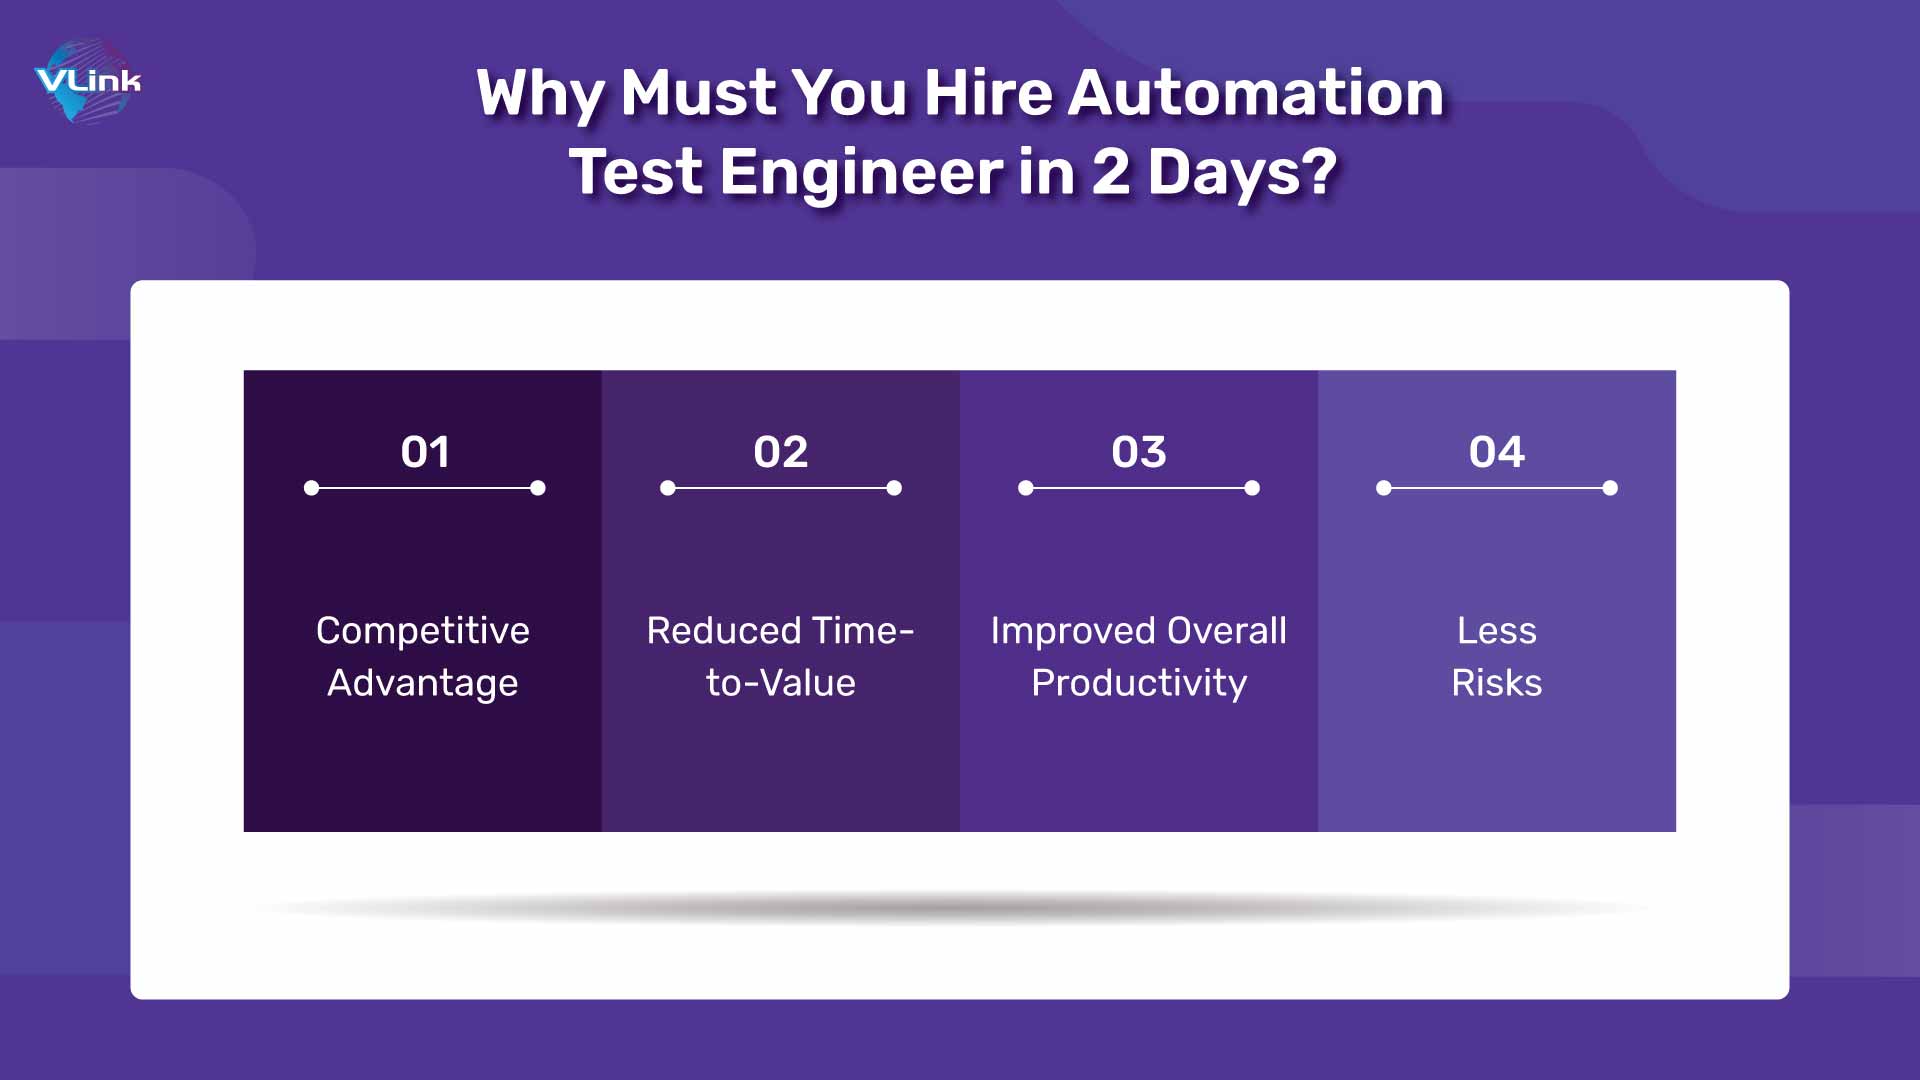 Why Must You Hire Automation Test Engineer in 2 Days?